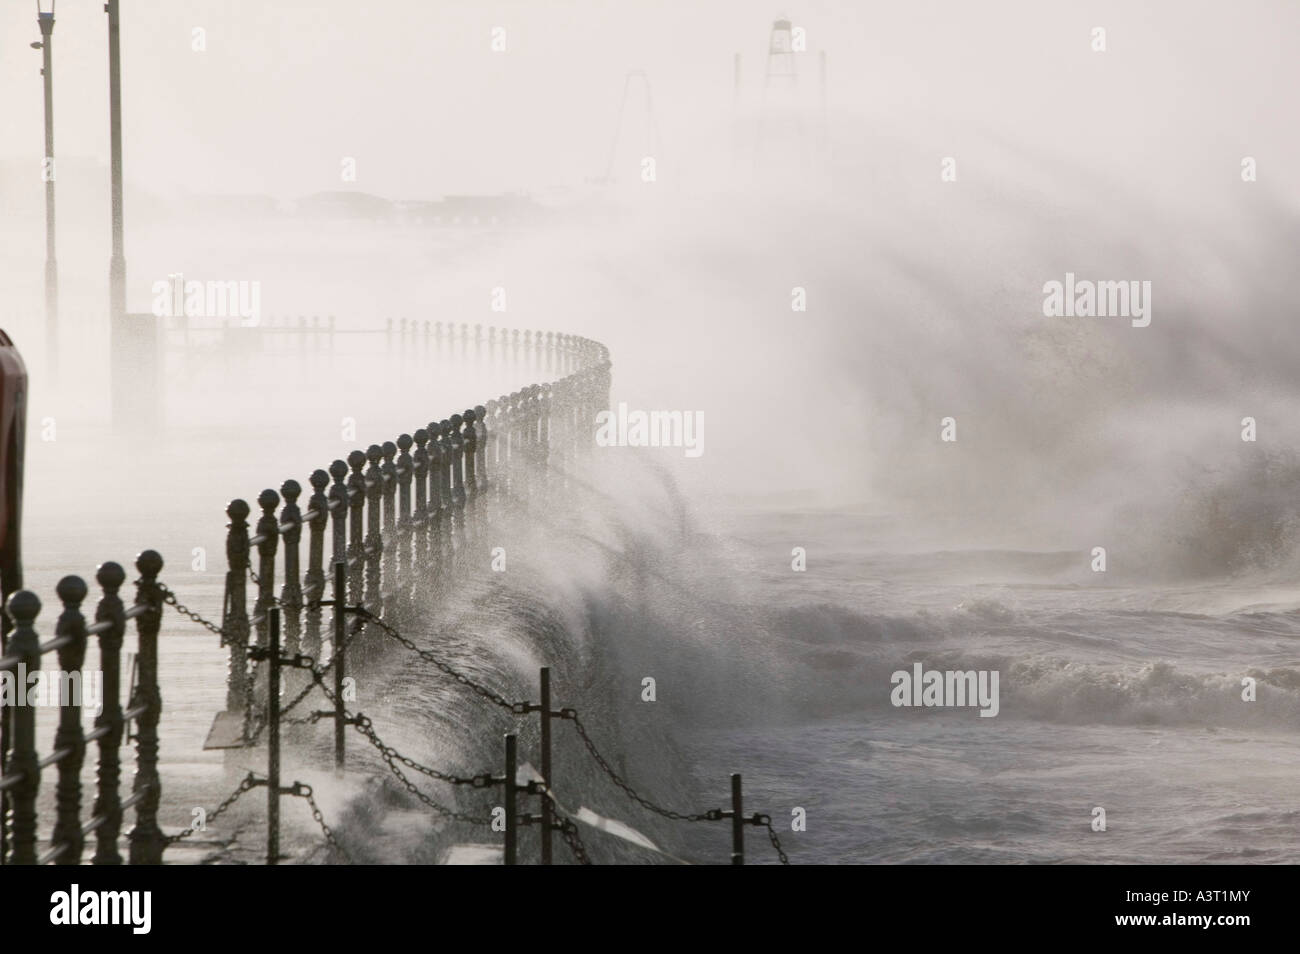 A severe storm hitting Blacvkpool seafront, the storm on the 18th Jan 2007 swept across England killing 13 people Stock Photo